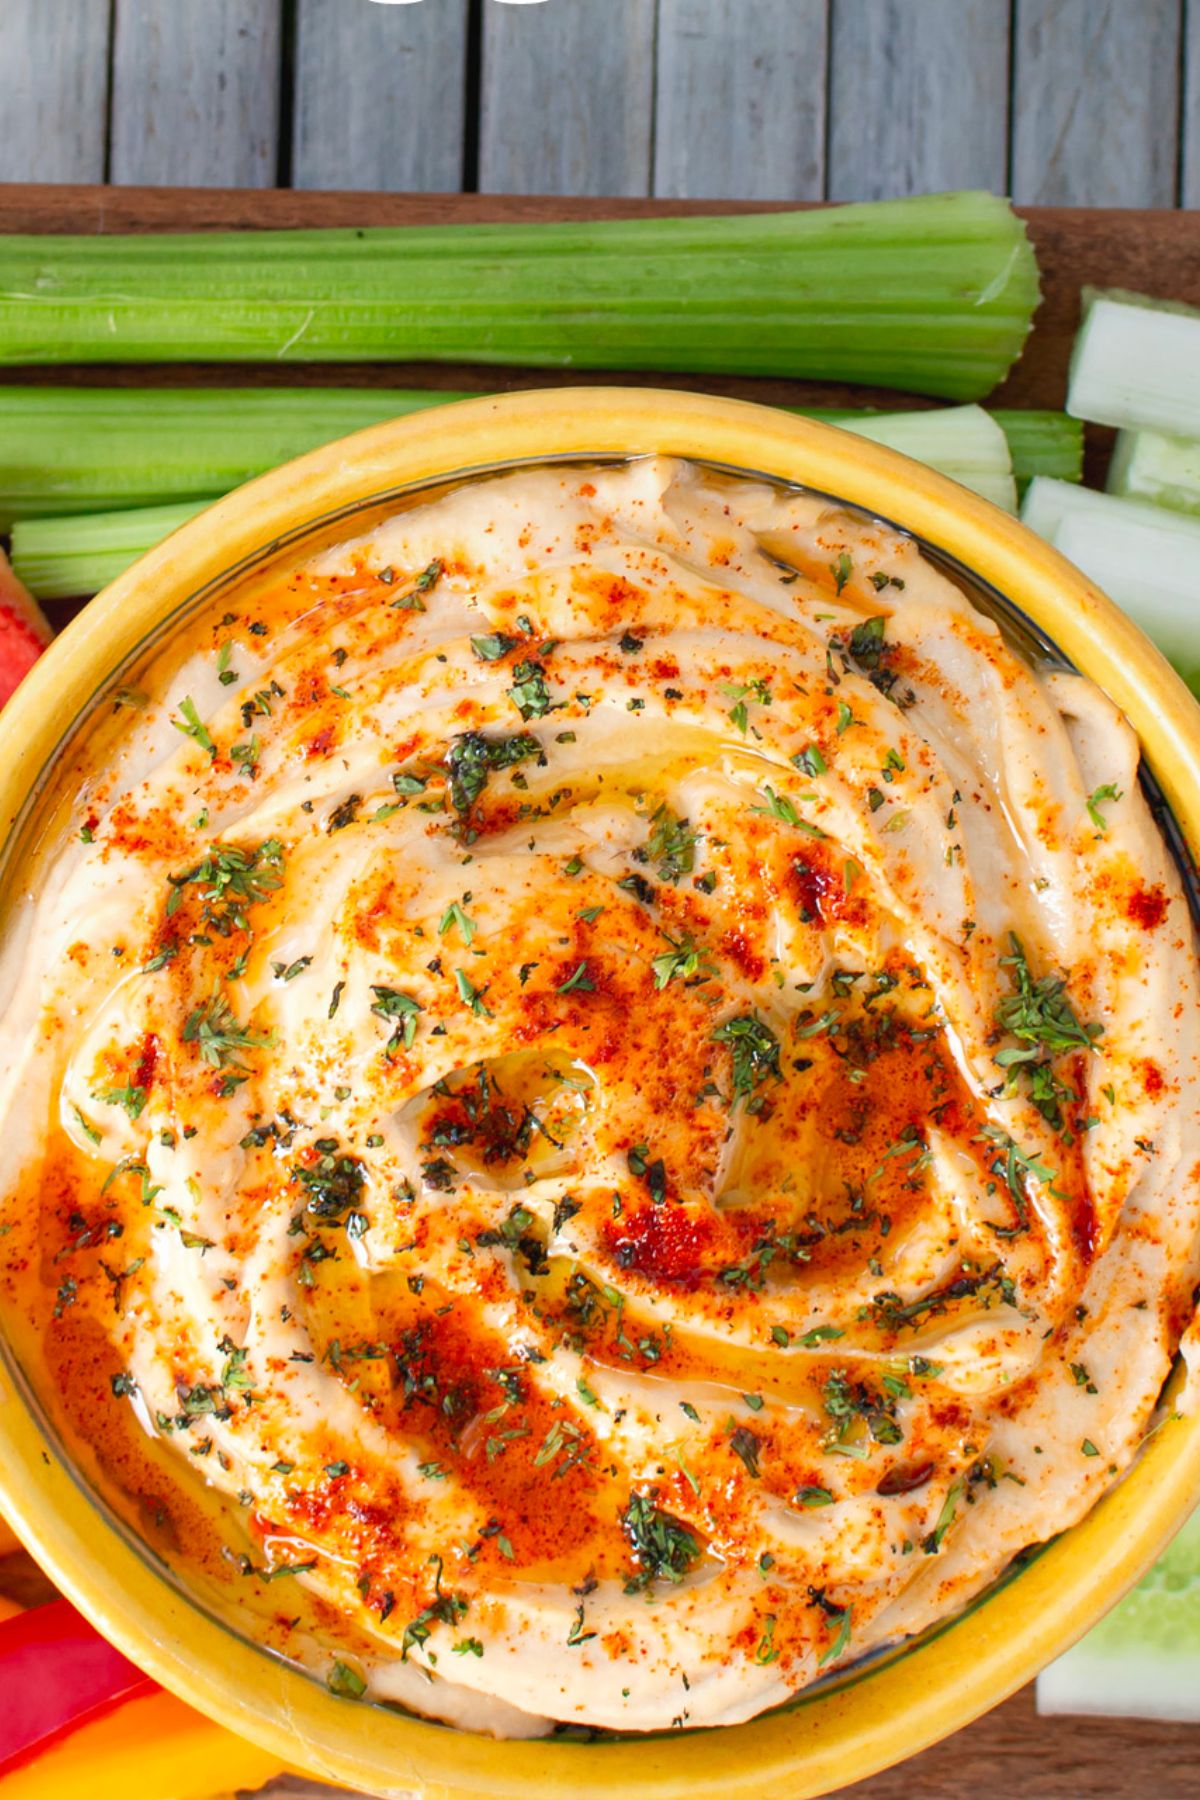 Gluten Free Hummus Recipe with parsley in a yellow bowl